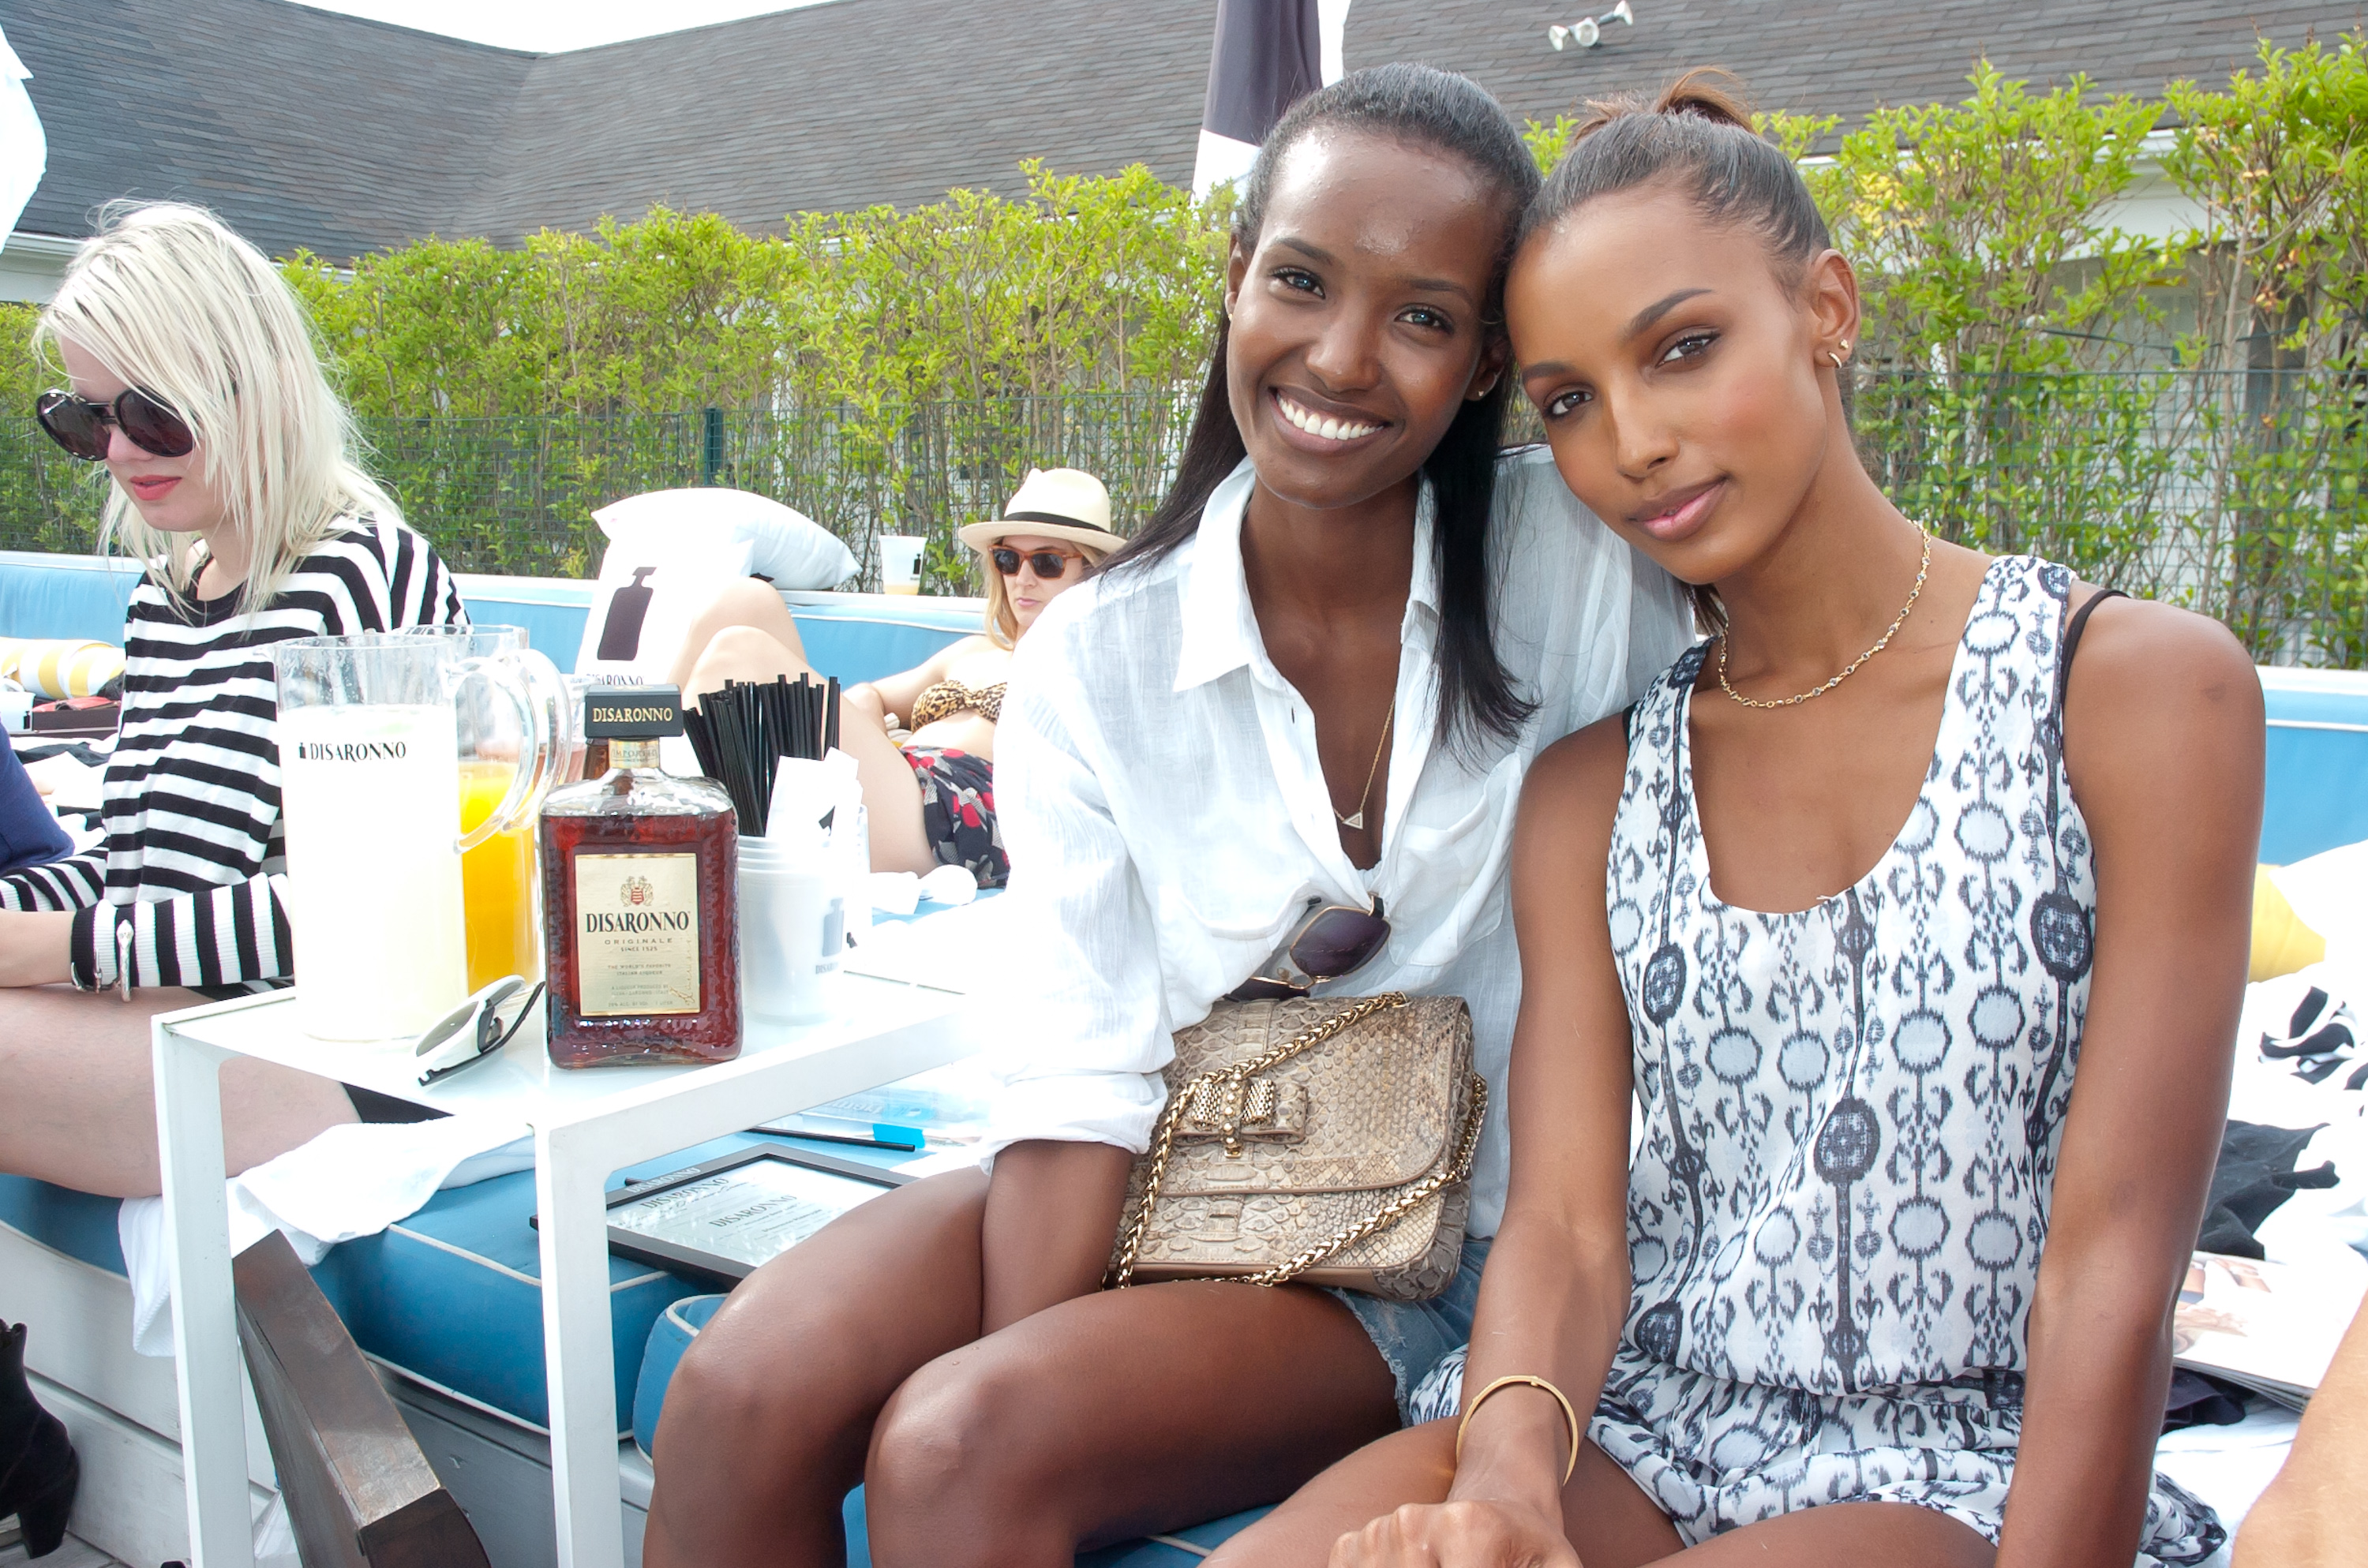 Guests Sip On Disaronno Sours During Their Weekend Getaway At The Disaronno Summer Camp - Day 1